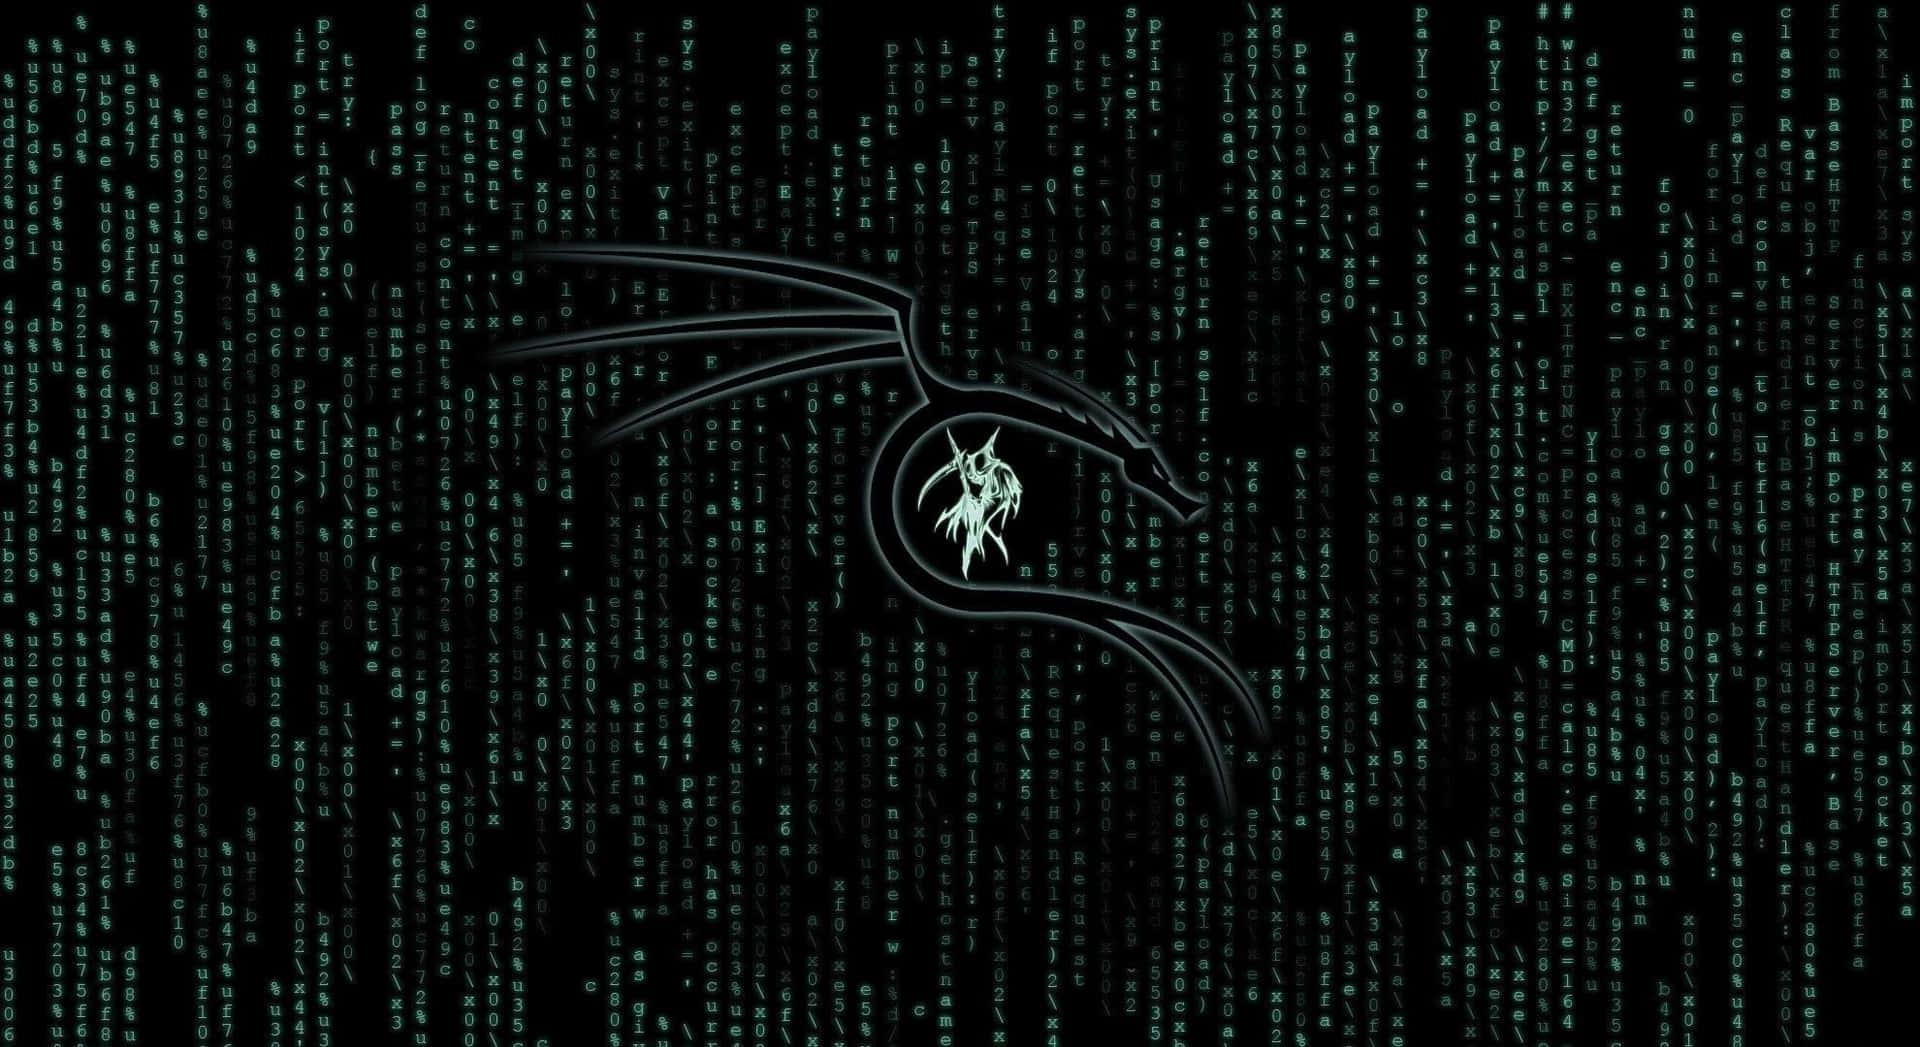 Explore the power of Kali Linux